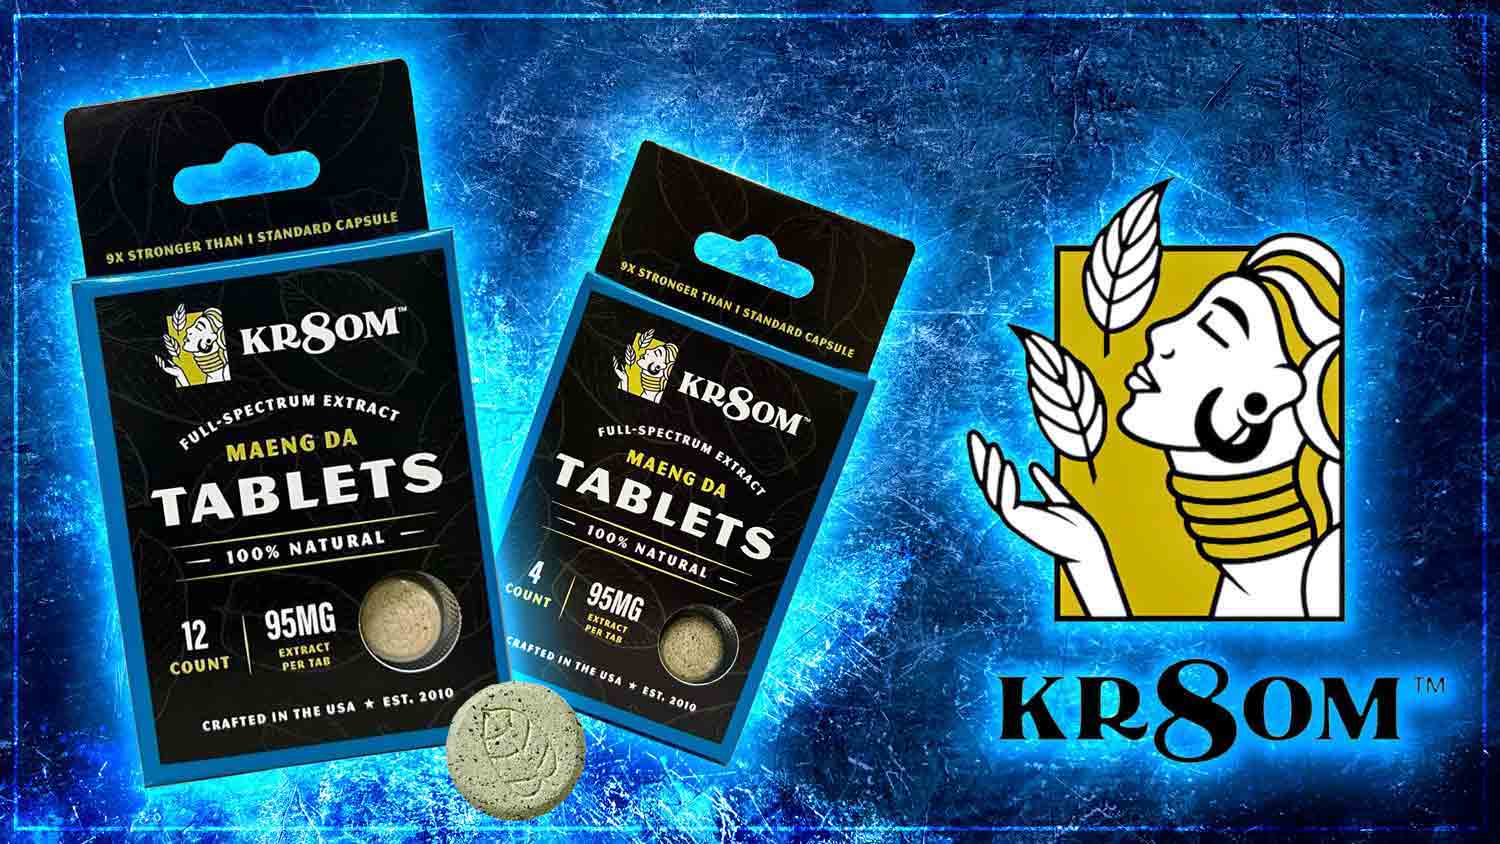 Kr8om Kratom Extract Tablets Maeng Da 95 mg 4 ct and 12 ct